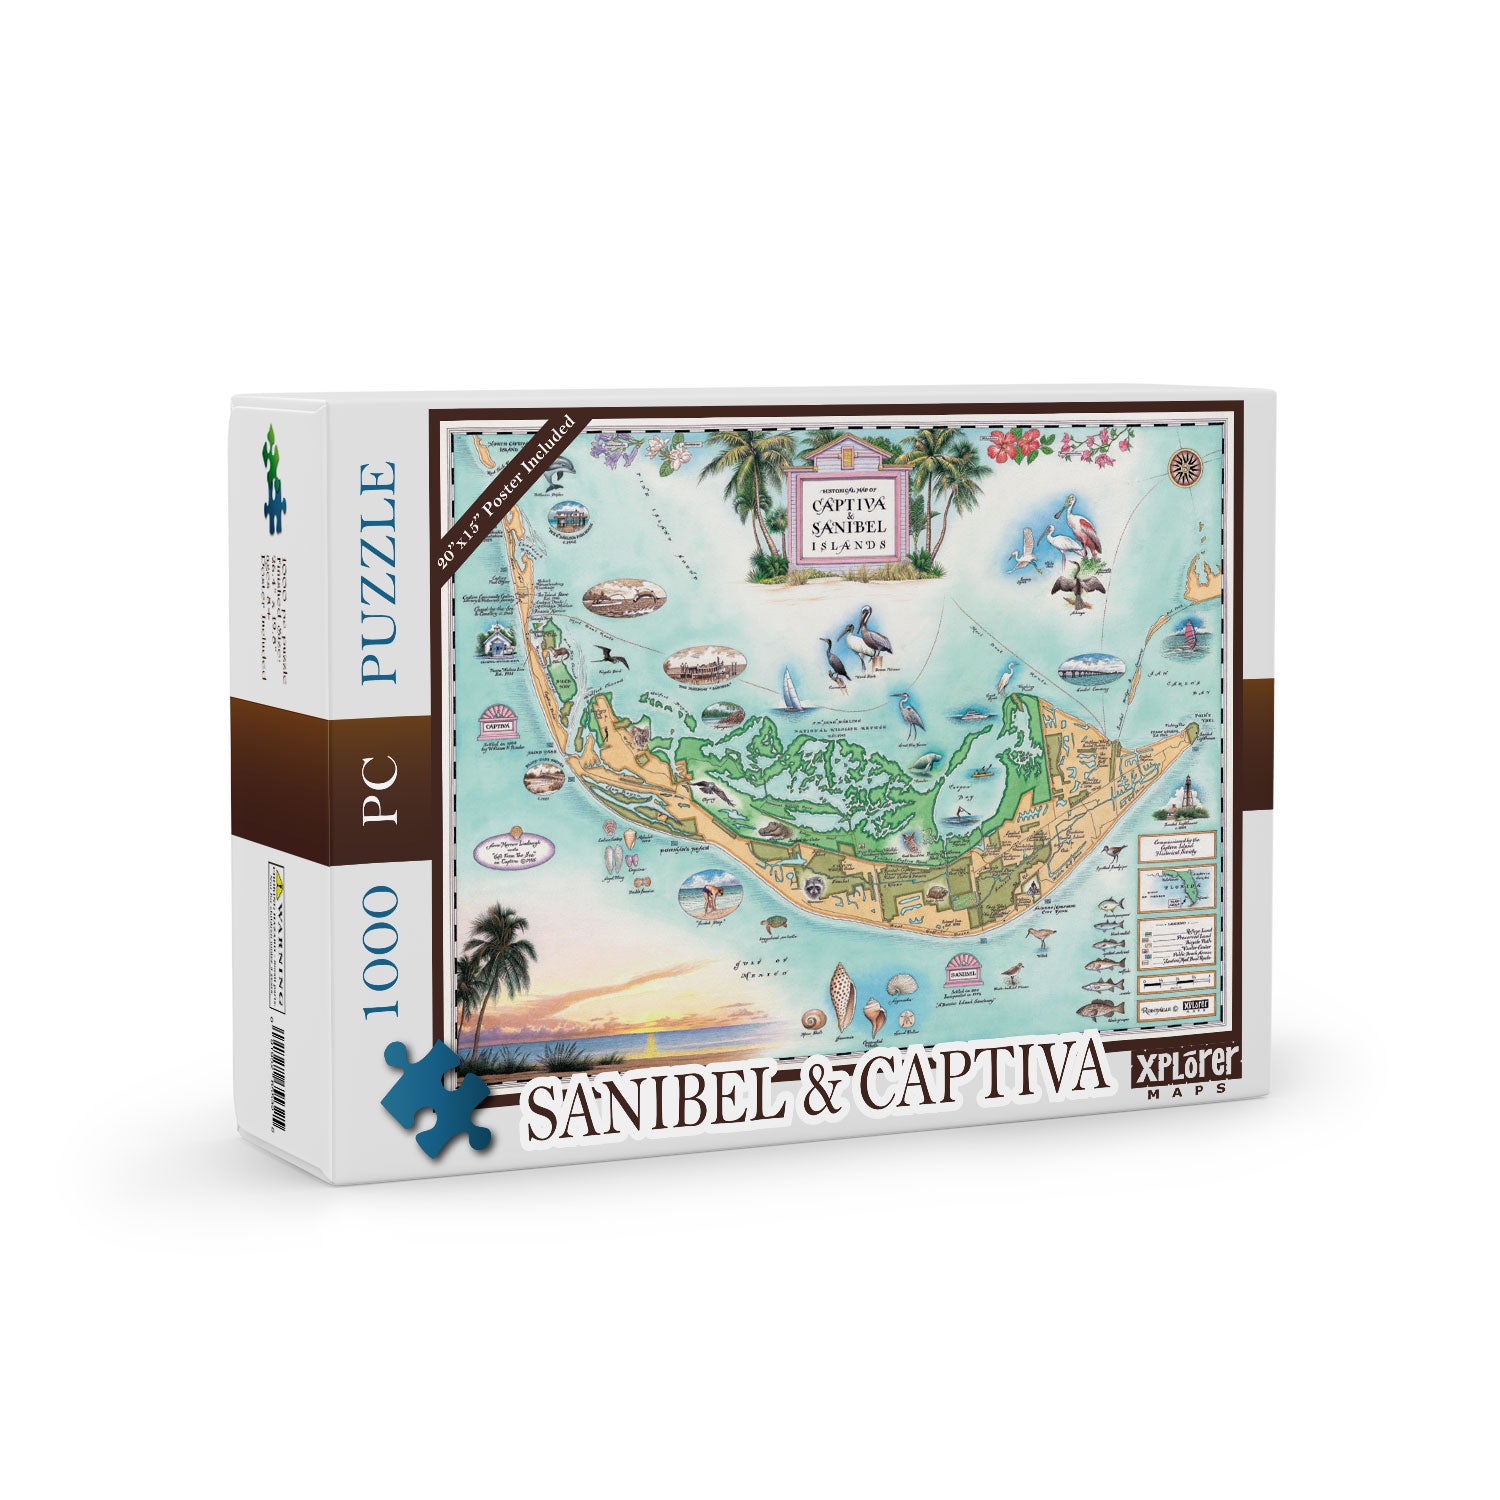 Florida's Sanibel & Captiva Islands Map Jigsaw Puzzle by Xplorer Maps. Features illustrations of places such as Ding Darling Wildlife Sanctuary, Bailey-Matthews Shell Museum, and Sanibel Lighthouse. Flora and fauna include the Loggerhead sea turtle, Manatee, and Great Blue Heron. Many other birds and sea animals are illustrated. 